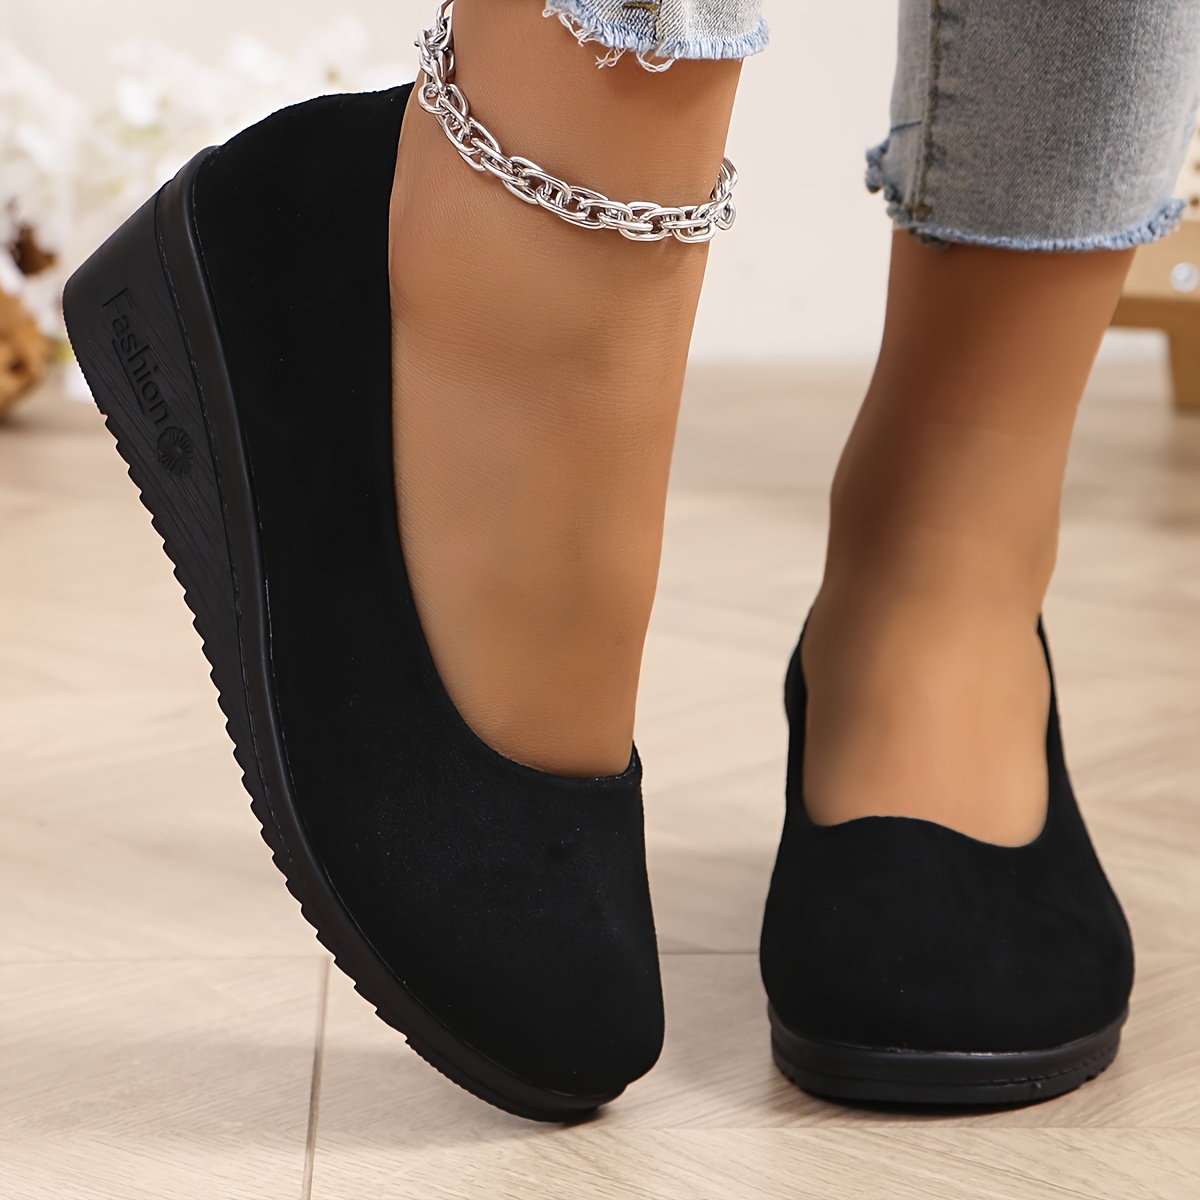 

Women's Round Toe Wedge Heels, Comfortable Soft Sole Slip On Shoes, Casual All-match Commuter Work Shoes